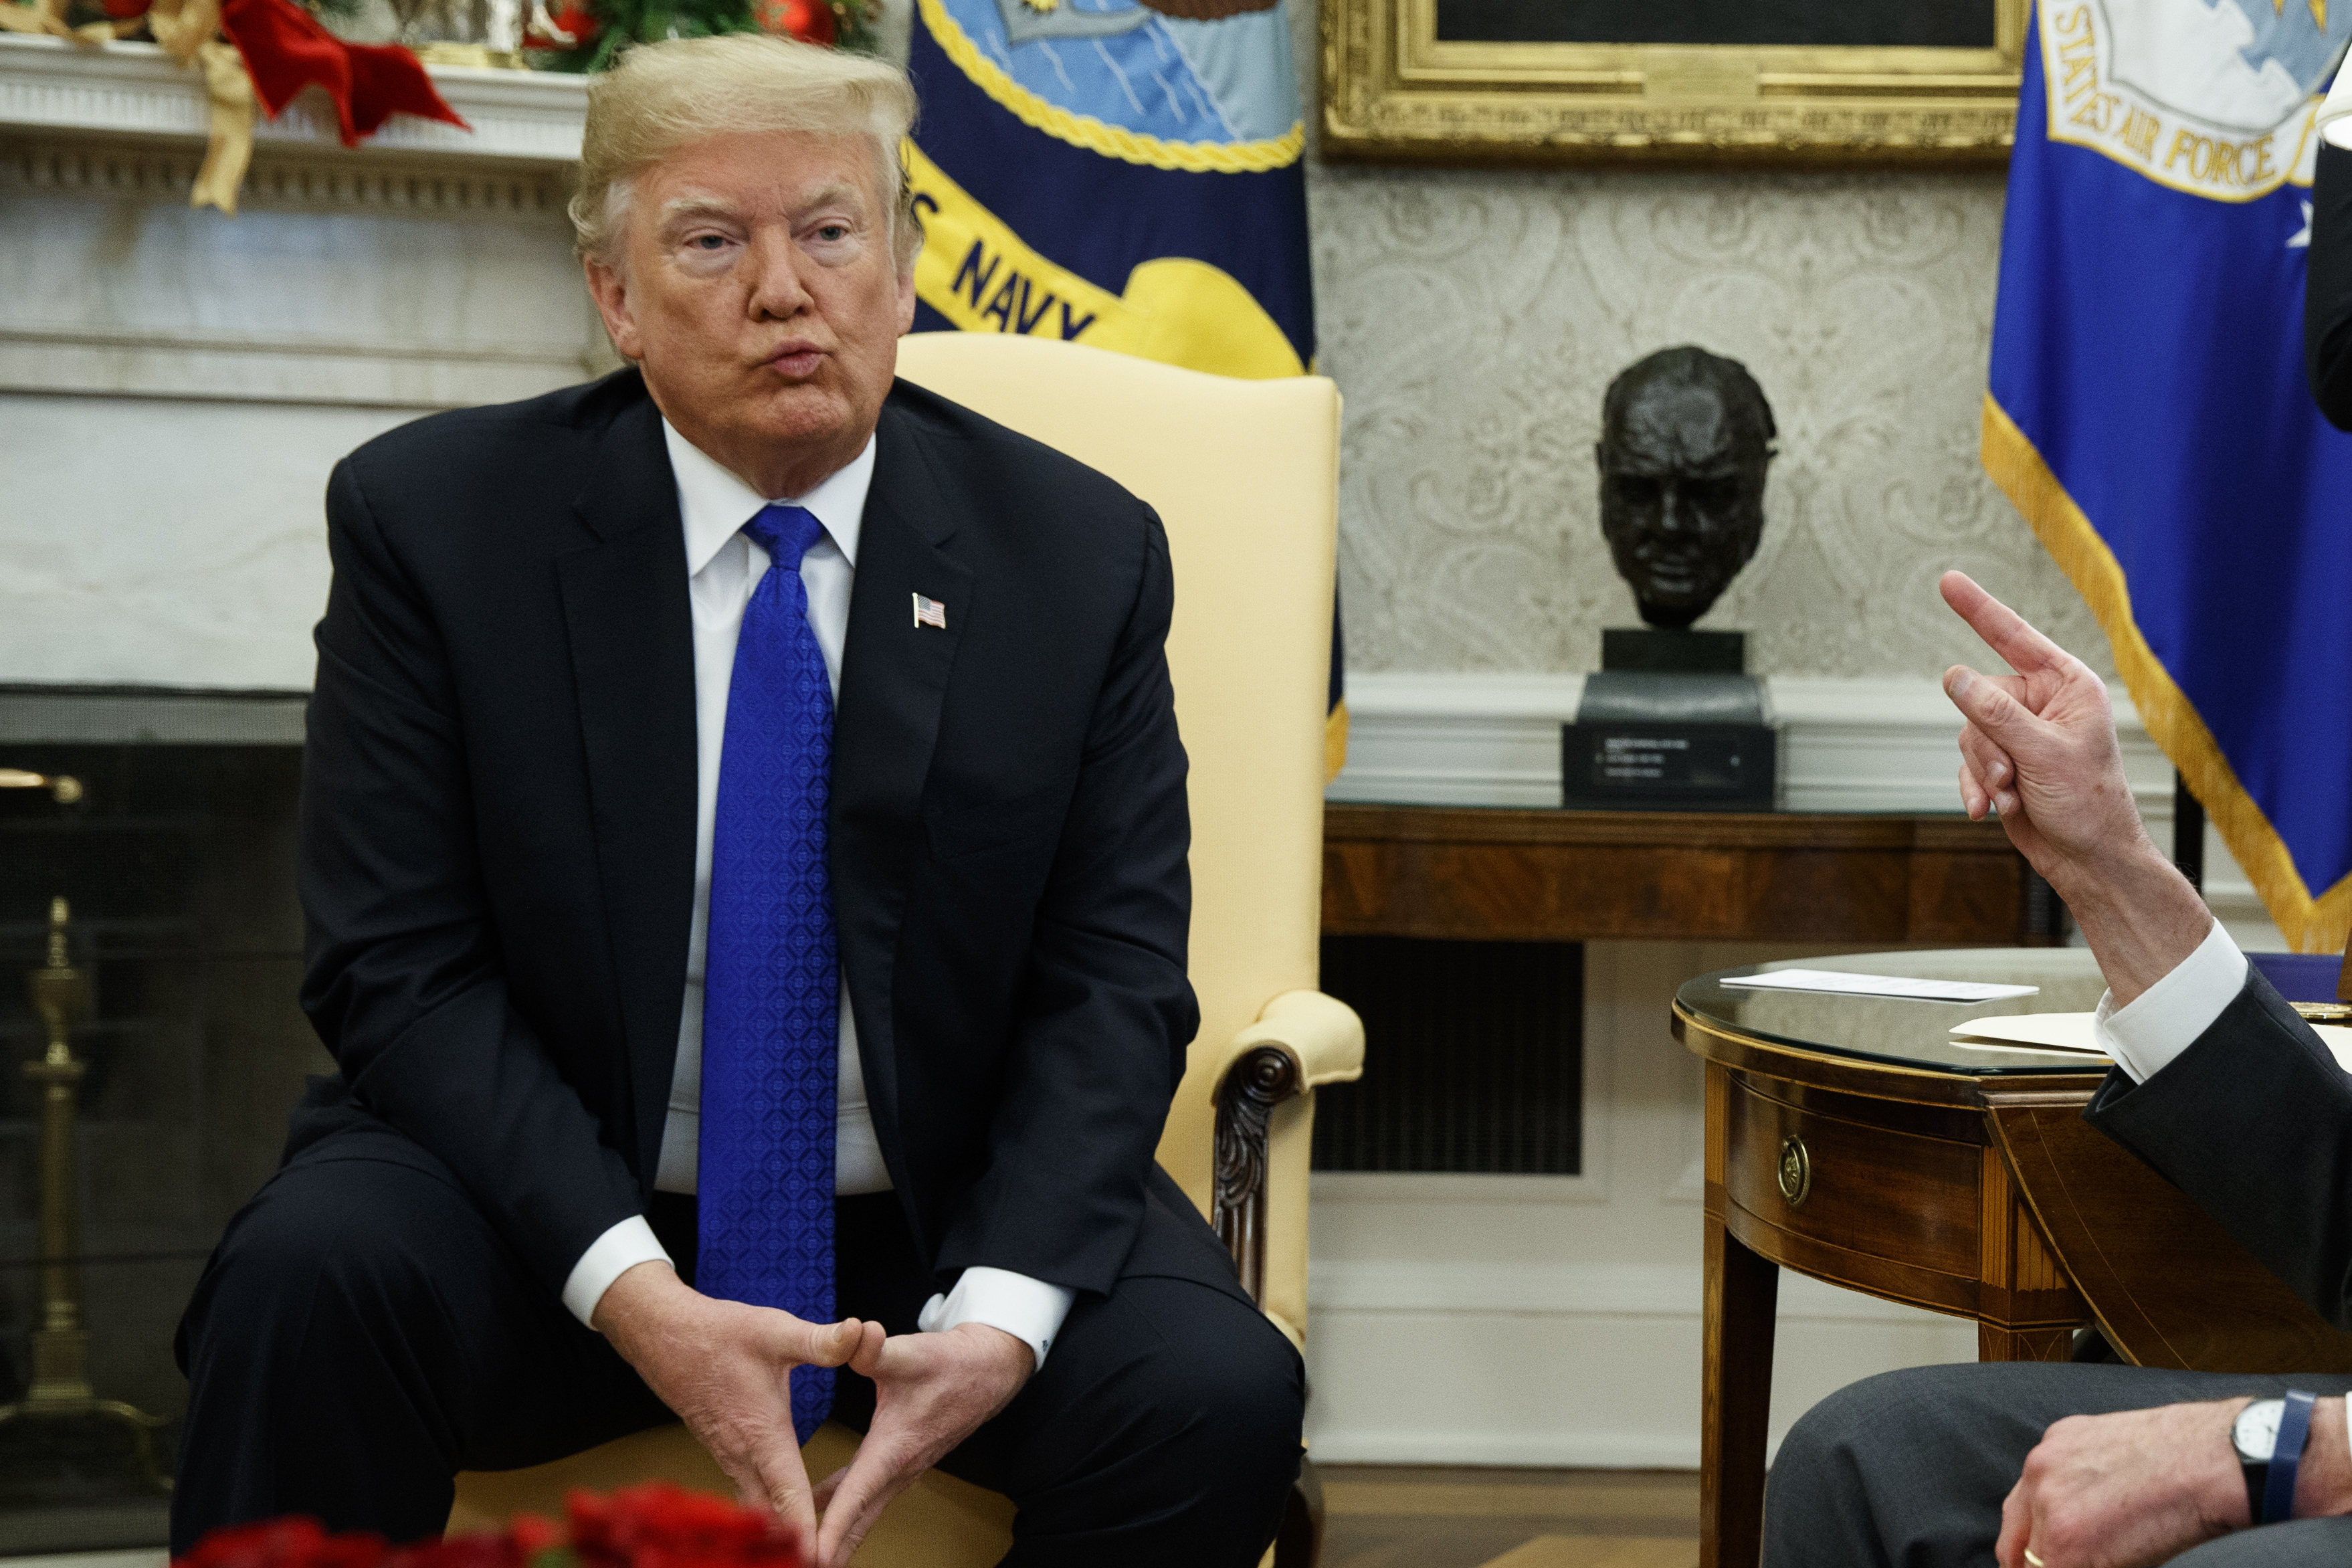 President Donald Trump listens during a meeting with Senate Minority Leader Chuck Schumer, D-N.Y., and House Minority Leader Rep. Nancy Pelosi, D-Calif., in the Oval Office of the White House